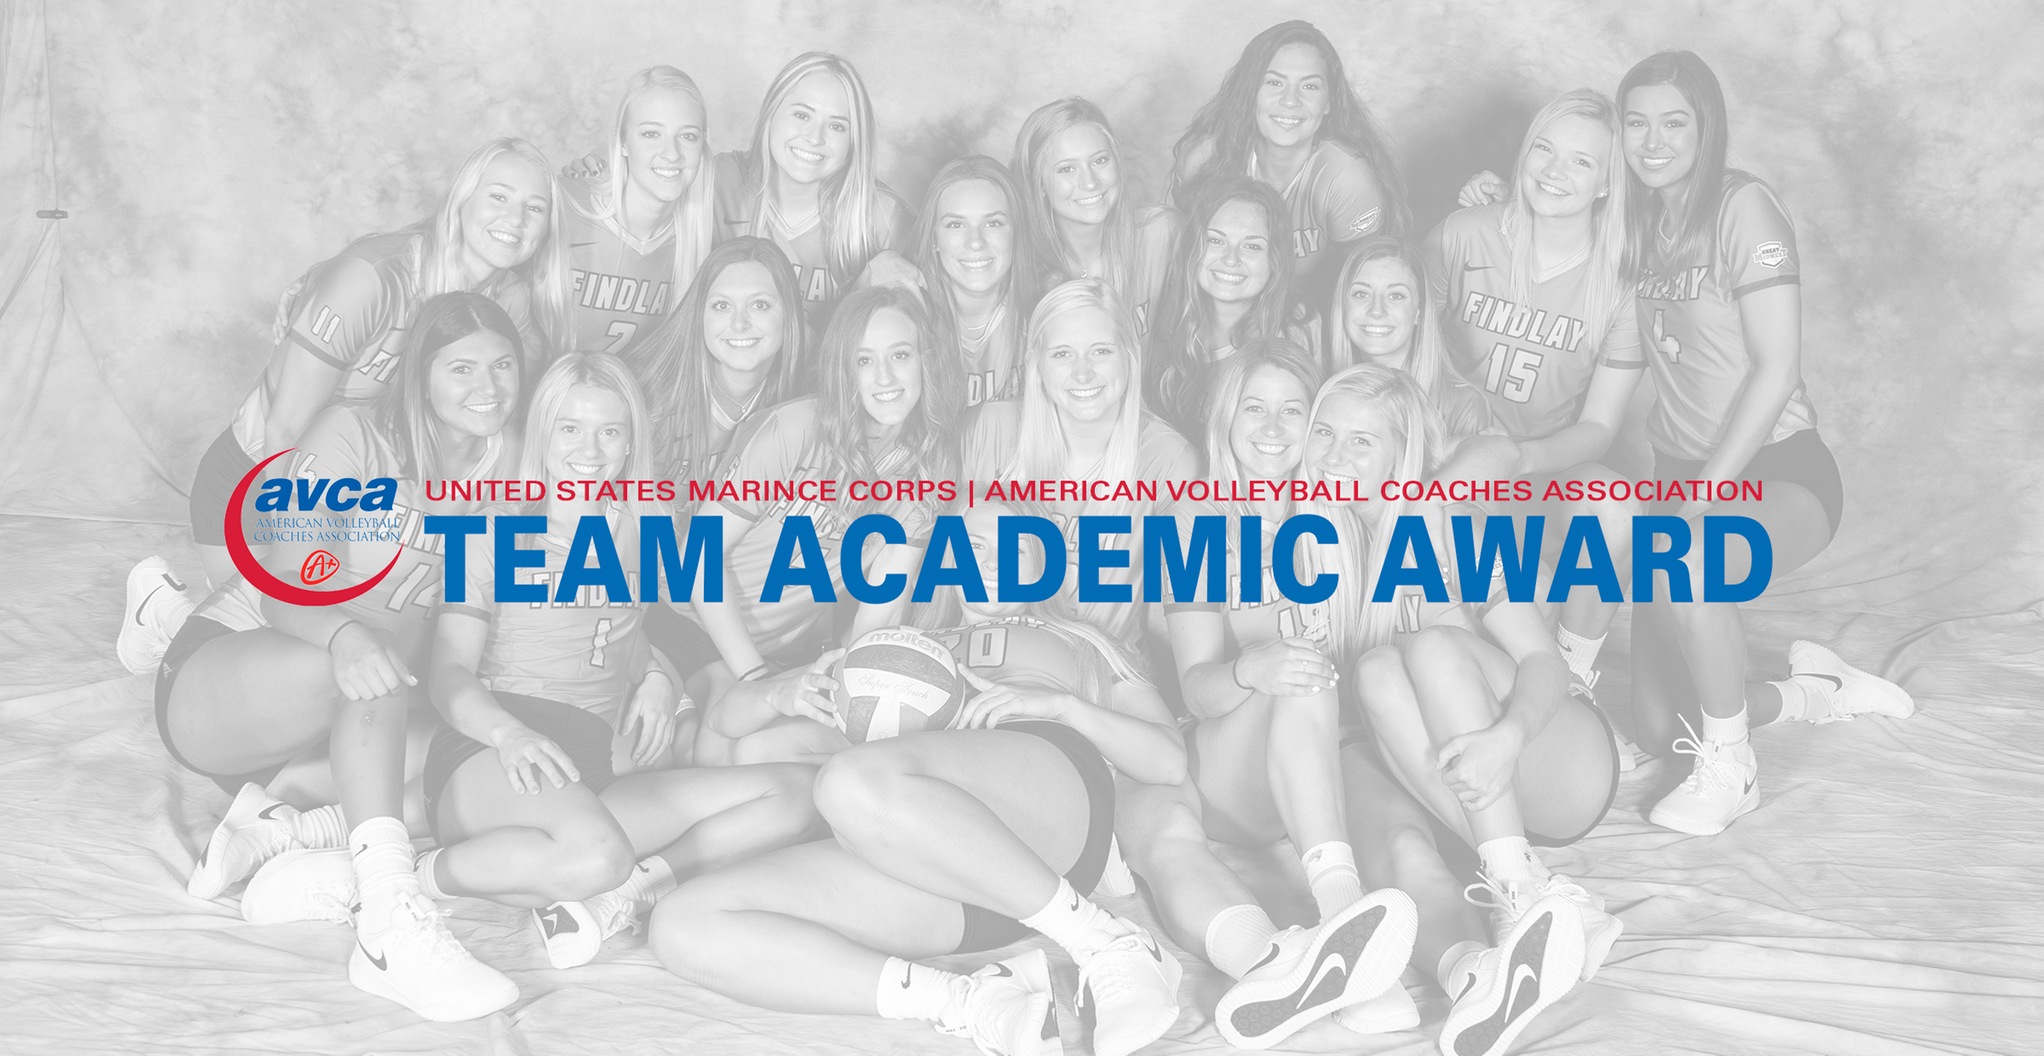 Team Academic Award for volleyball with team picture in the background.